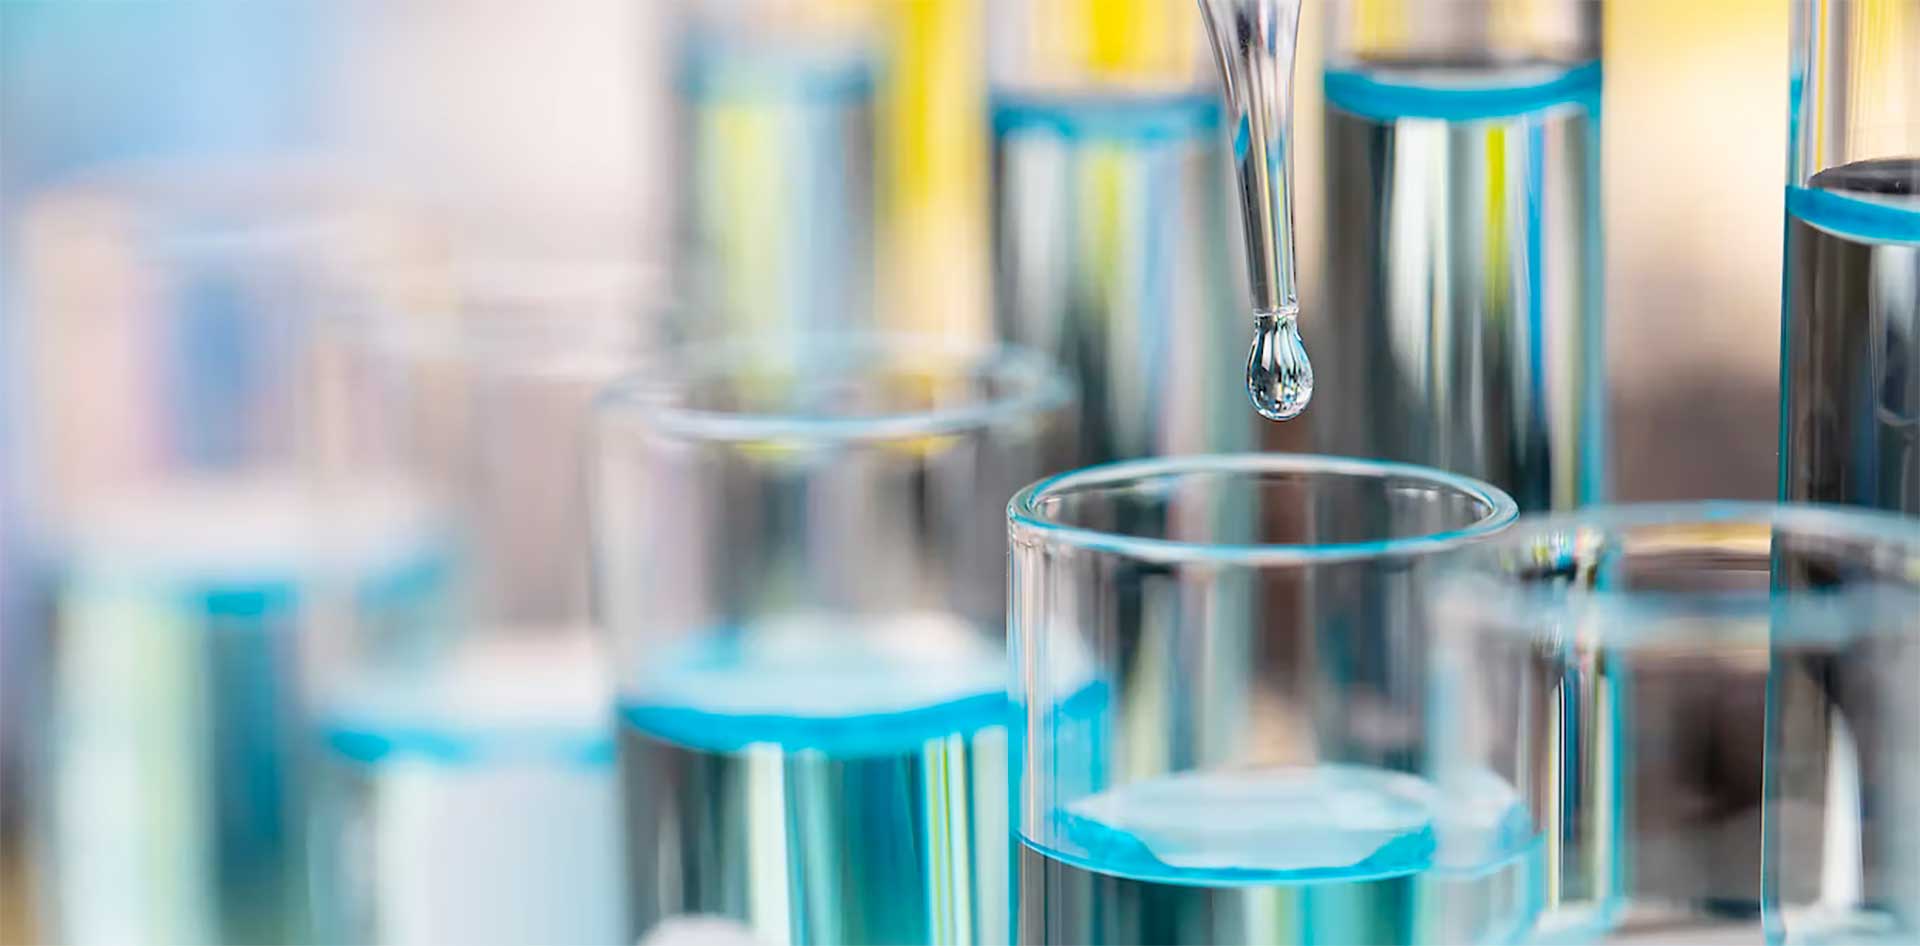 How long do we really need chemicals to last? Sura Nualpradid/EyeEm via Getty Images